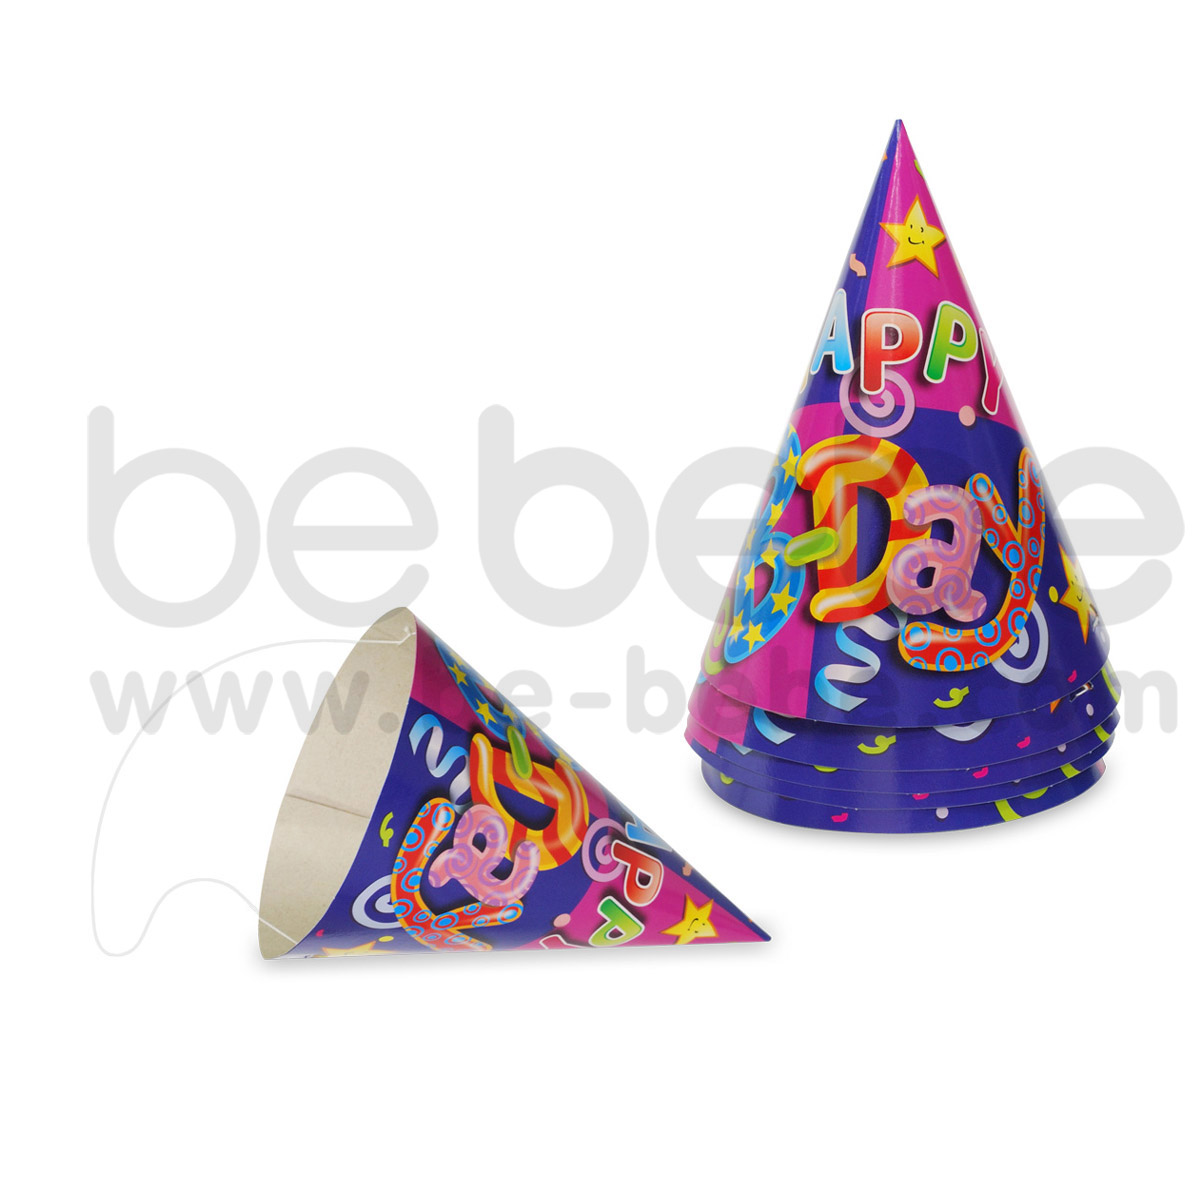 PARTY BUG : Cone hat 6 inch., 6 Packs